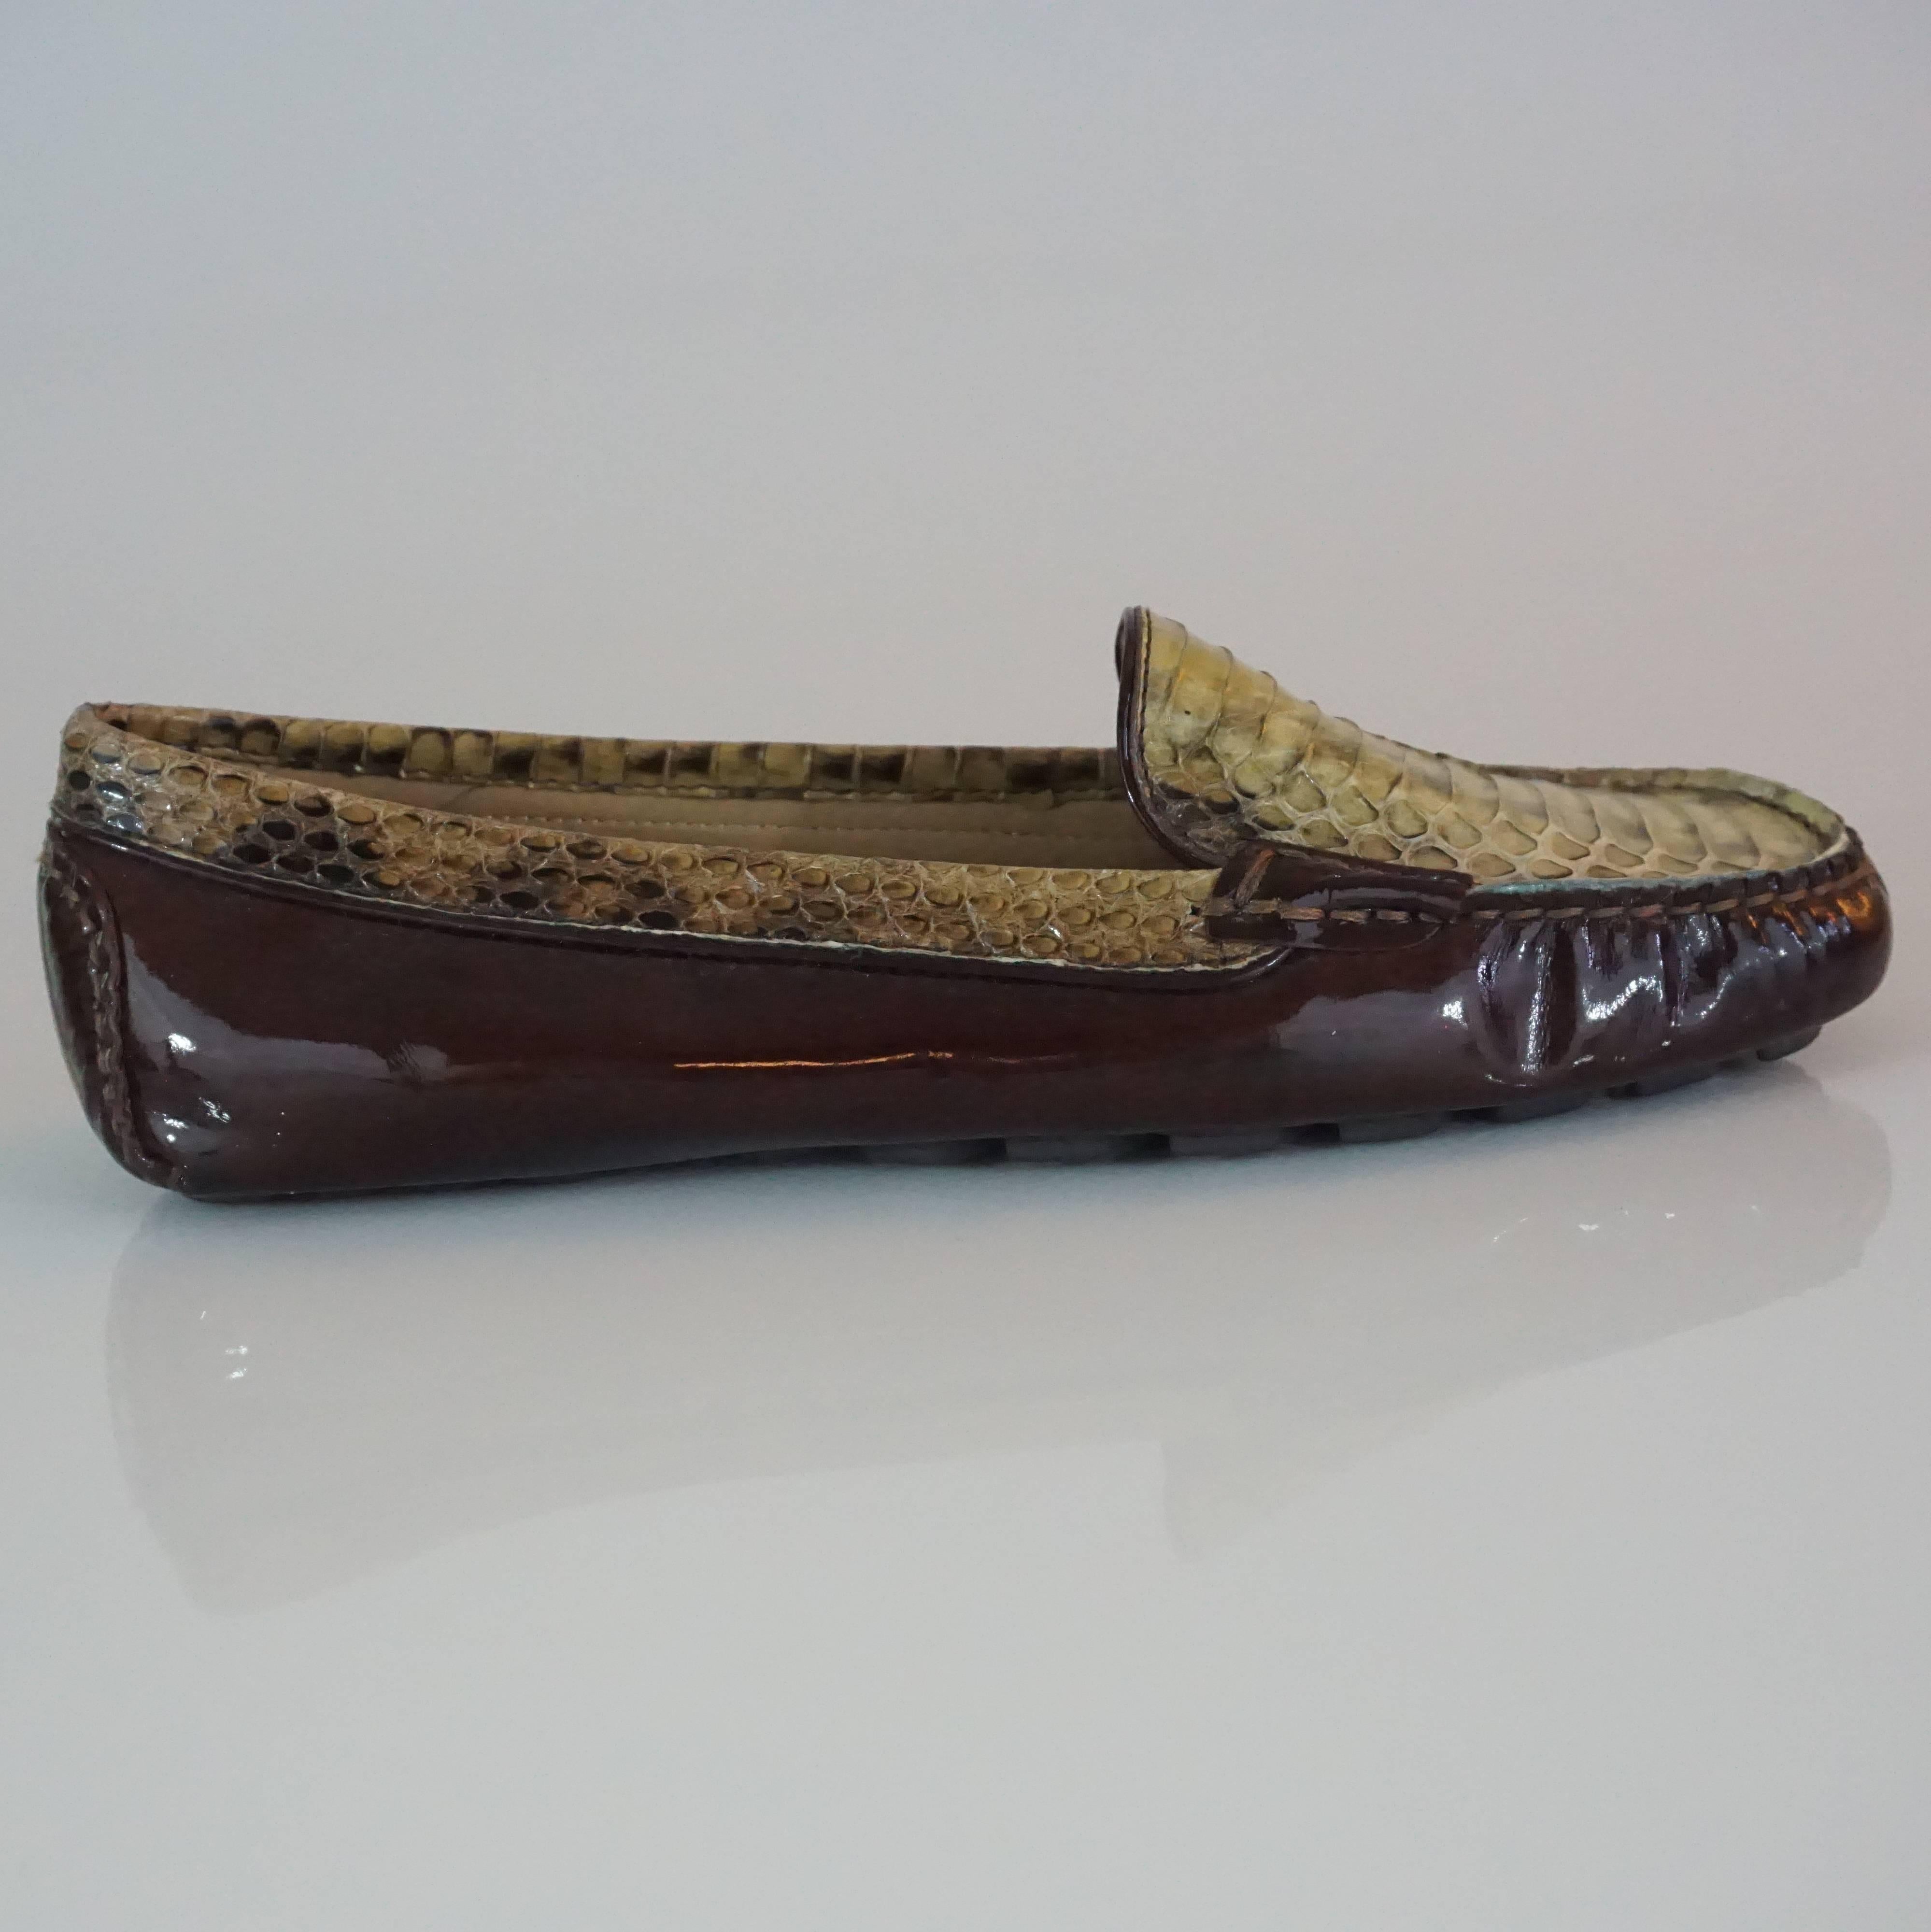 These Salvatore Ferragamo loafers are brown patent leather with green snake skin. They have brown stitching and are a size 5. They are in excellent condition. 